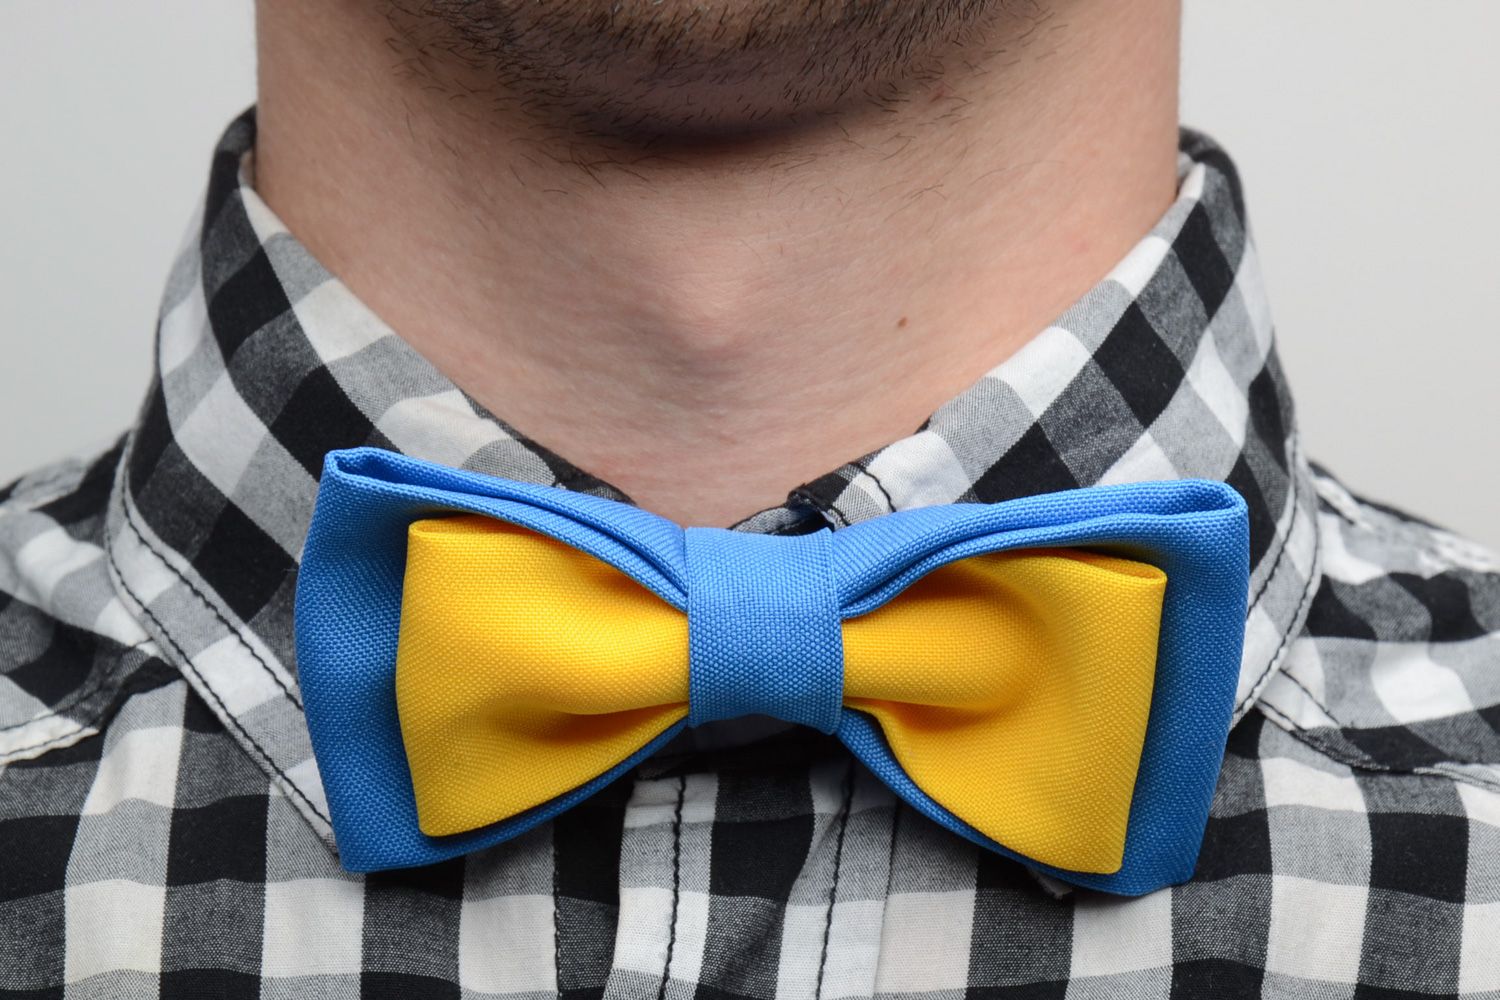 Handmade bow tie sewn of costume fabric in contrast combination of blue and yellow photo 1